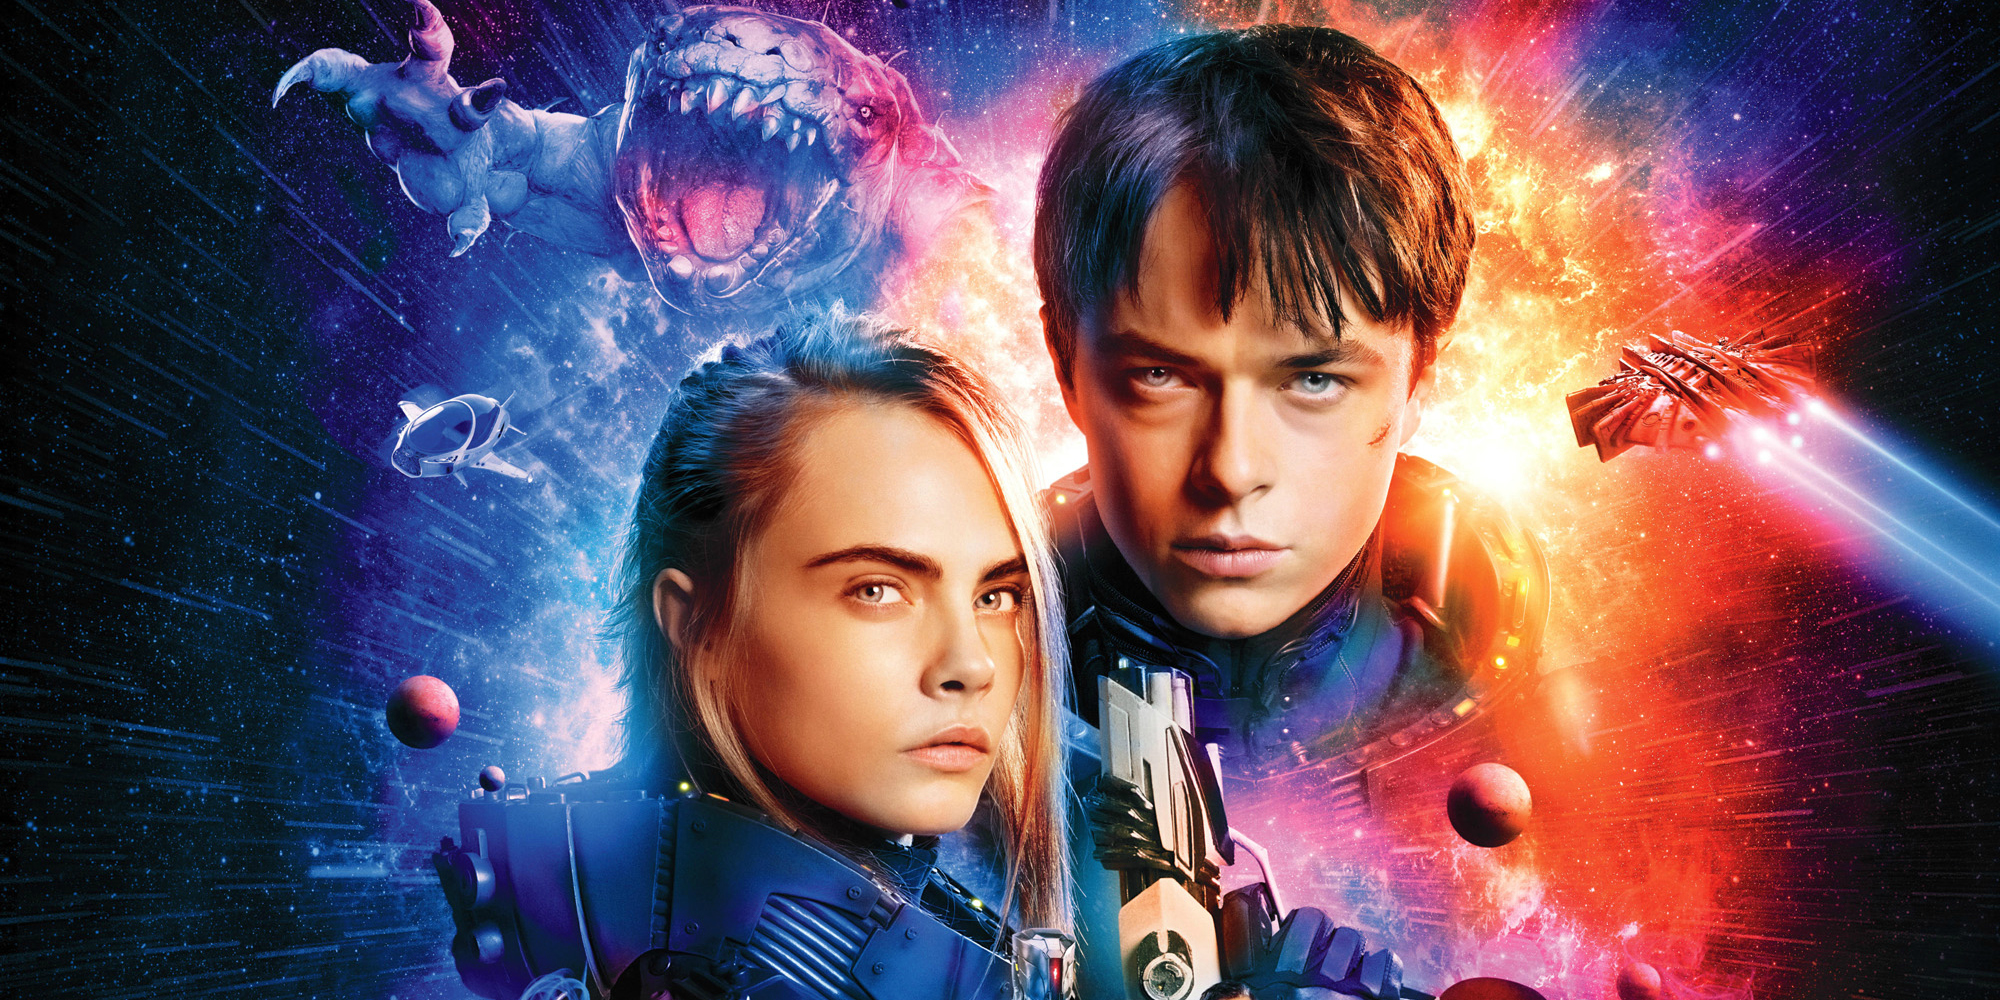 The Pearls In Valerian And The City Of A Thousand Planets Still Wallpapers